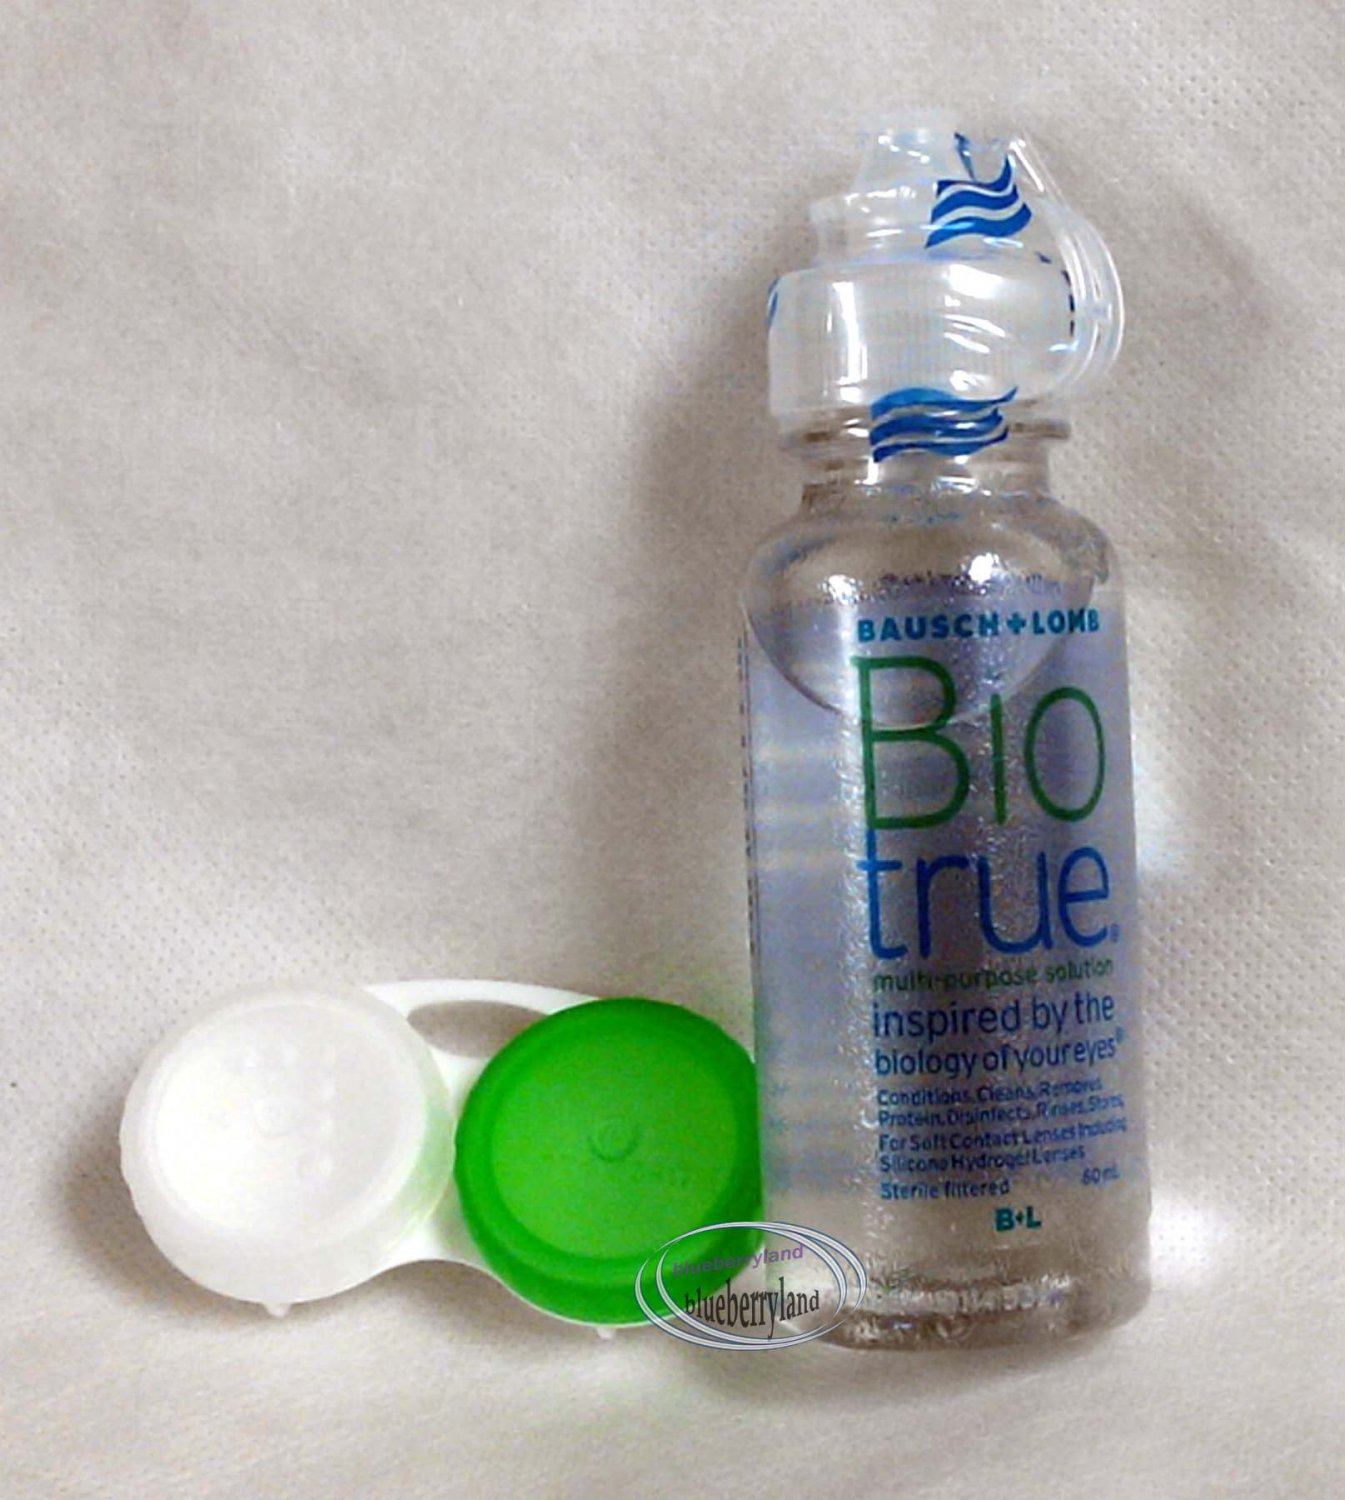 bausch-lomb-biotrue-multipurpose-solution-60ml-for-soft-contact-lenses